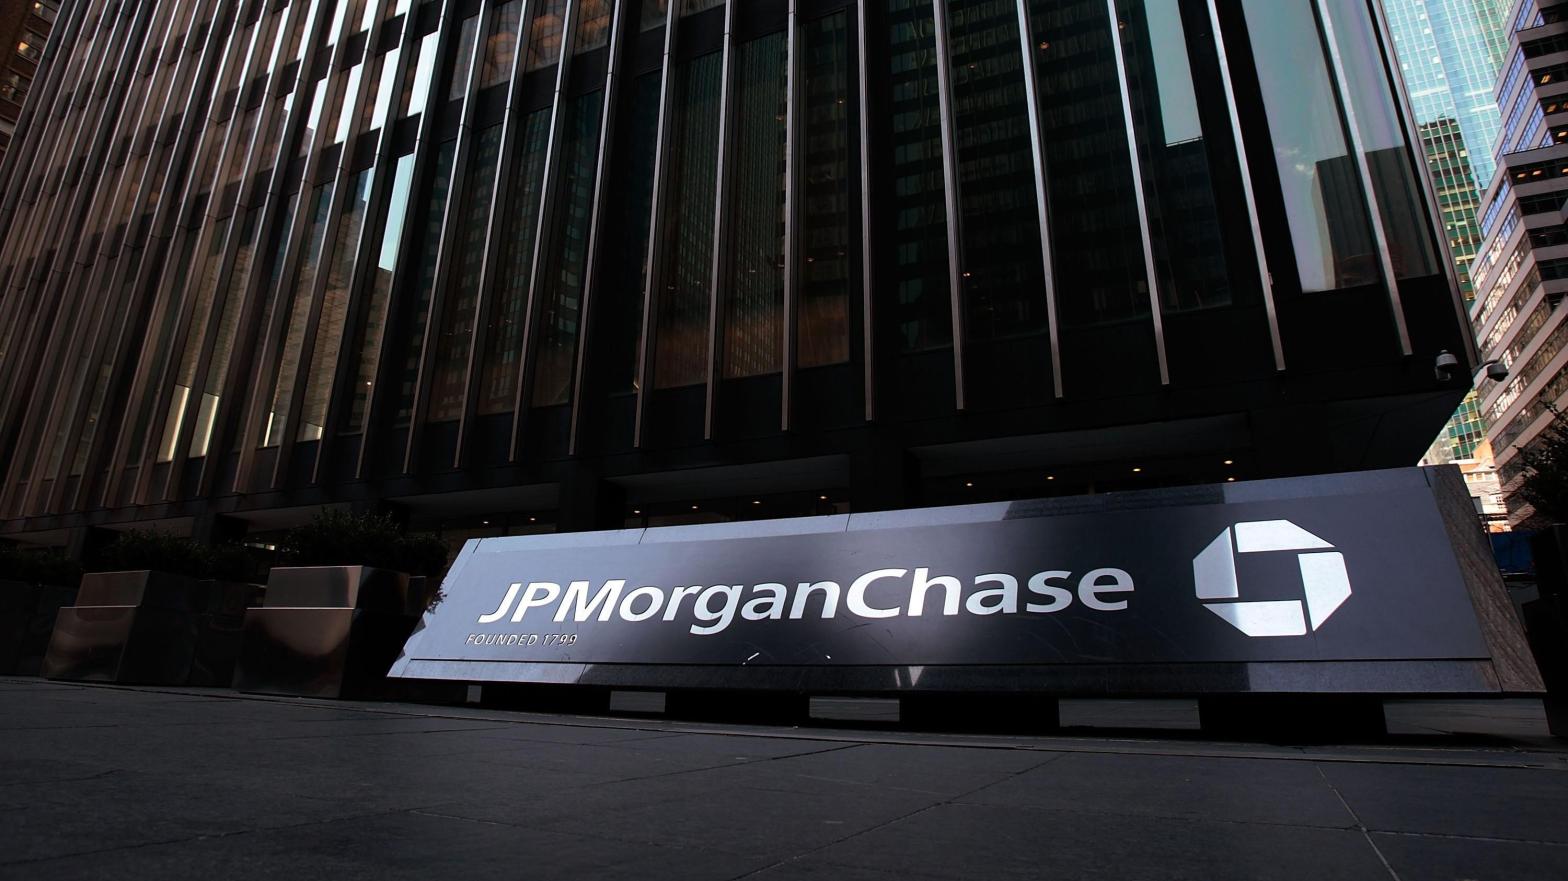 When pitching Frank to JPMorgan, Javice reportedly claimed the startup had over 4 million users, when in reality it had closer to 300,000. (Image: Chris Hondros, Getty Images)